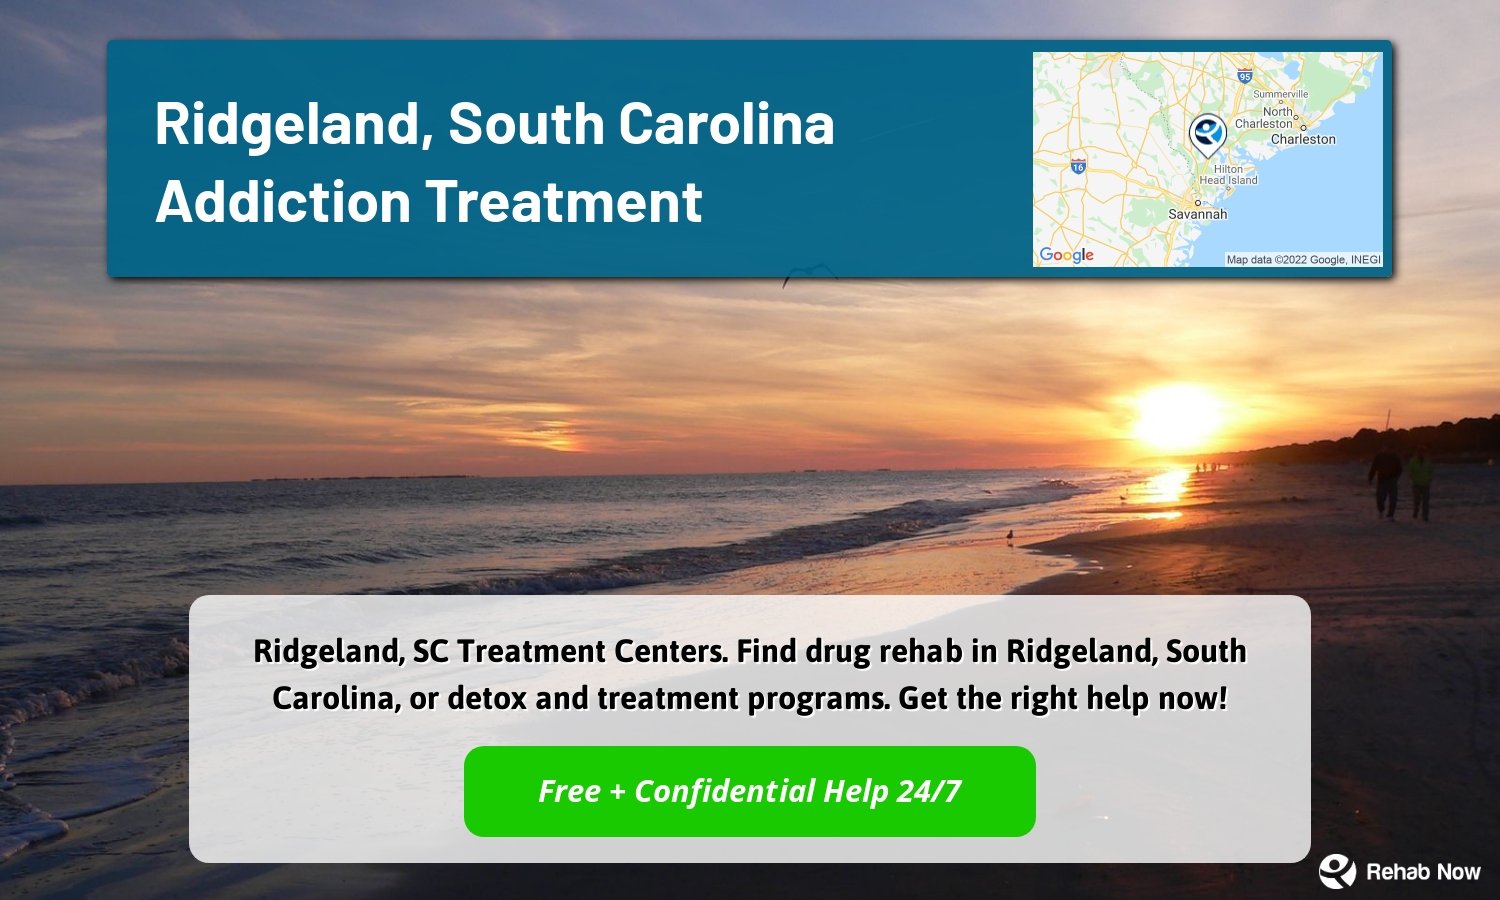 Ridgeland, SC Treatment Centers. Find drug rehab in Ridgeland, South Carolina, or detox and treatment programs. Get the right help now!